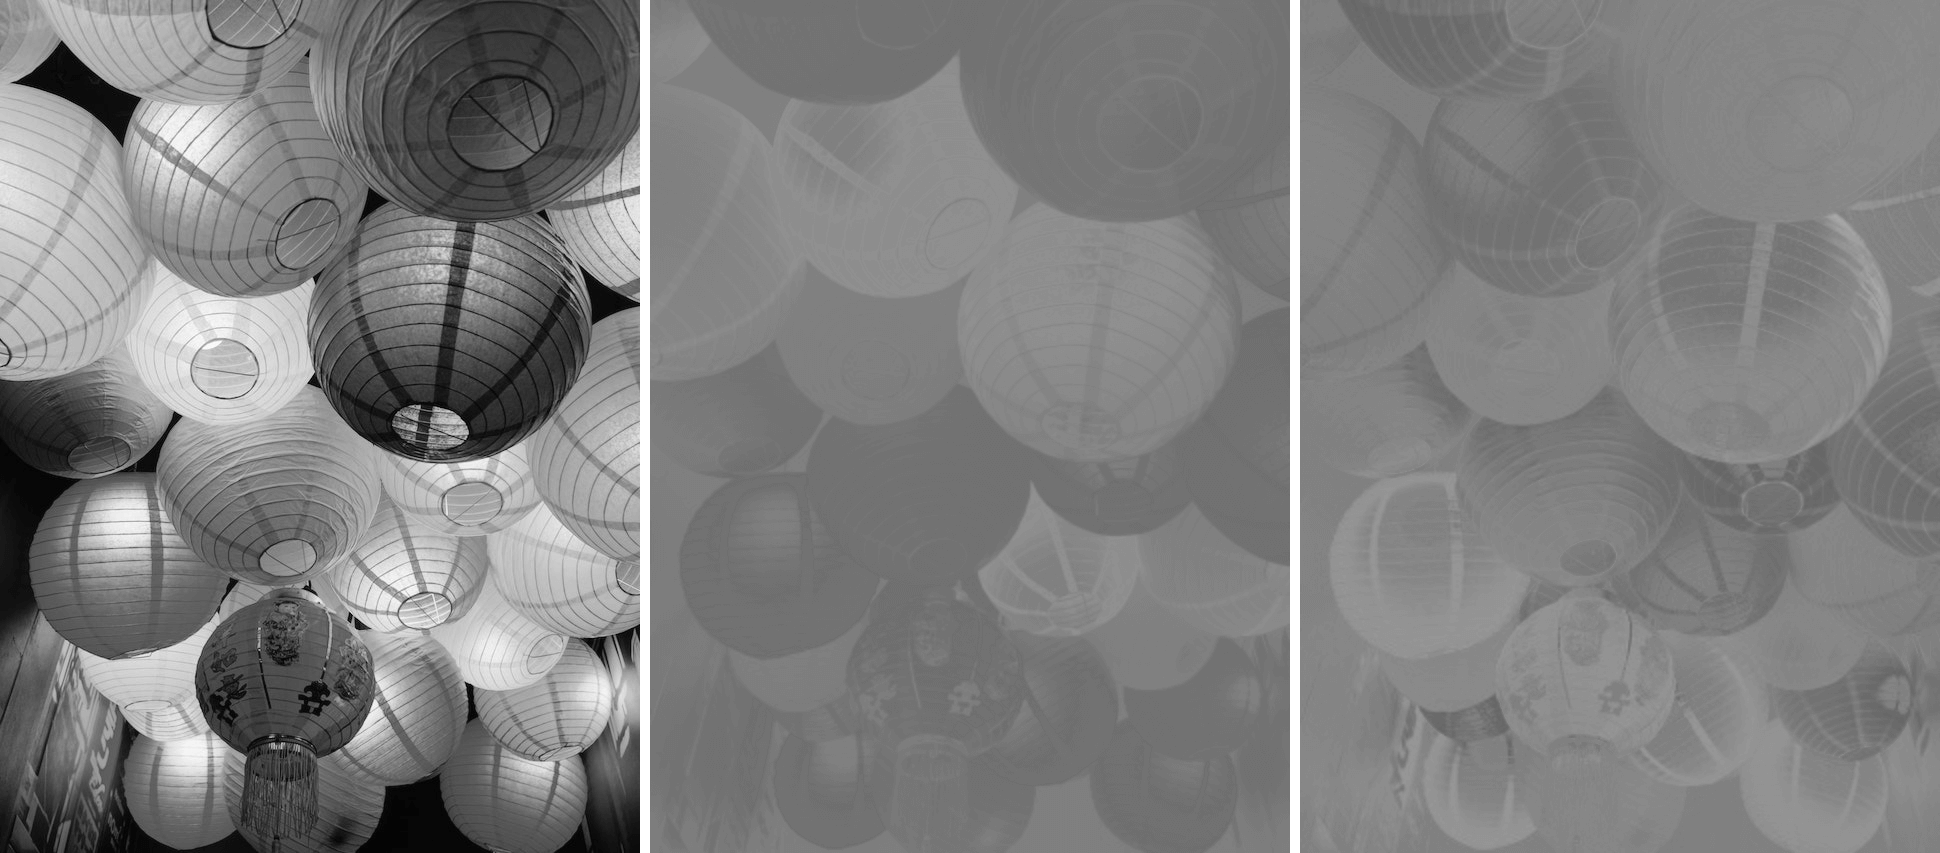 In this example, we start by extracting all channels of the YIQ color scheme, and then we convert them to grayscale representations. This process allows us to explore the individual components of luma (Y) and chrominance (I and Q) in a simplified grayscale format, in which brightness and color saturation do not distort the results. (Source: Pexels.)